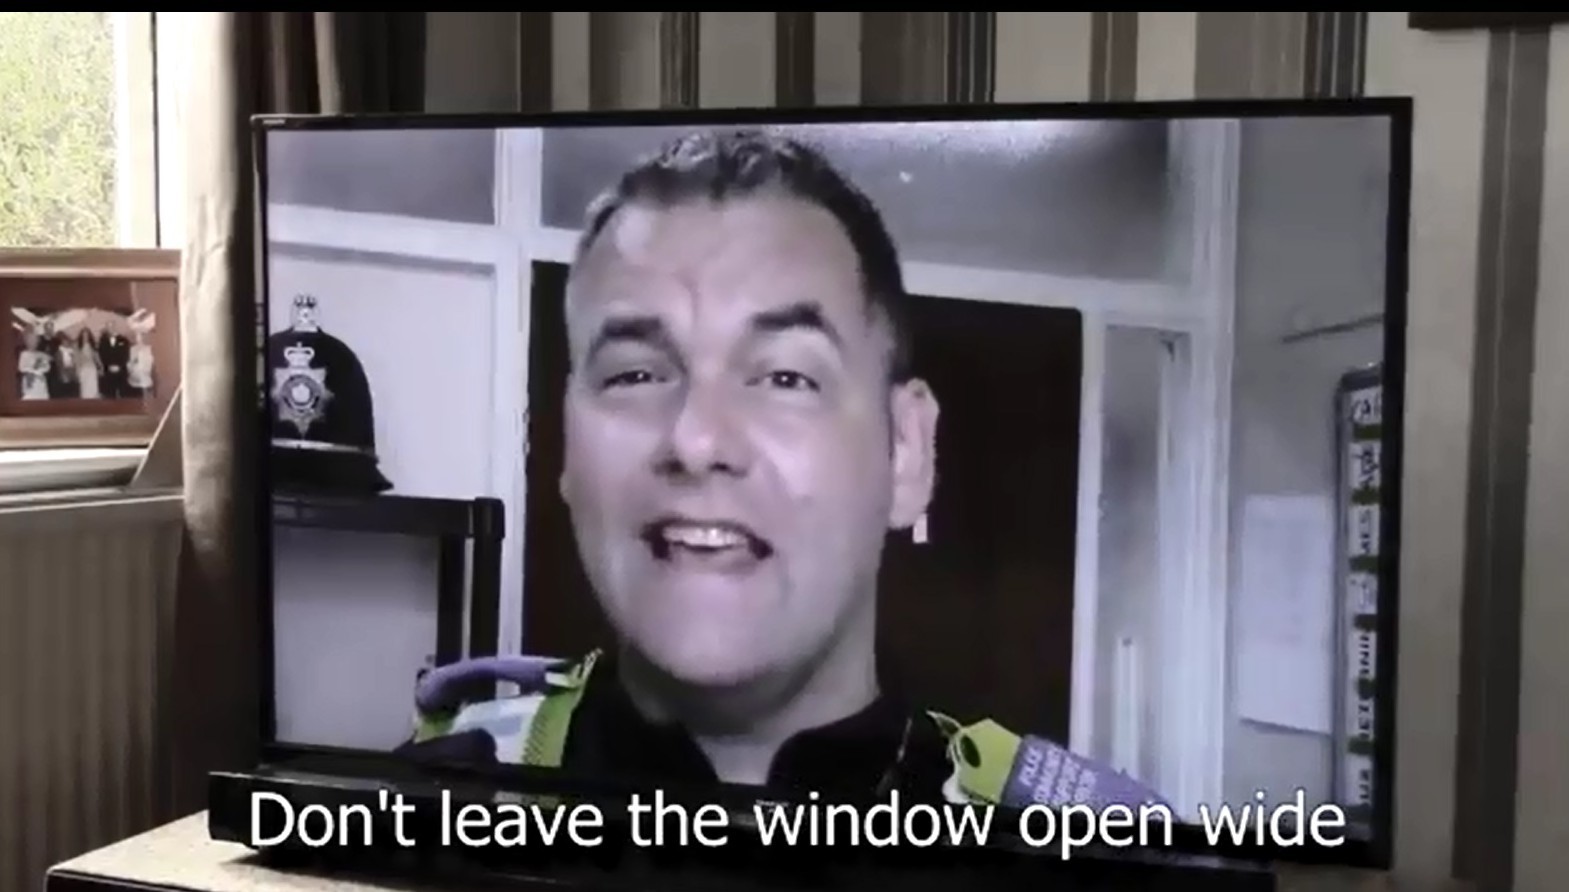 Police in West Yorkshire have recorded a new version of Let It Go